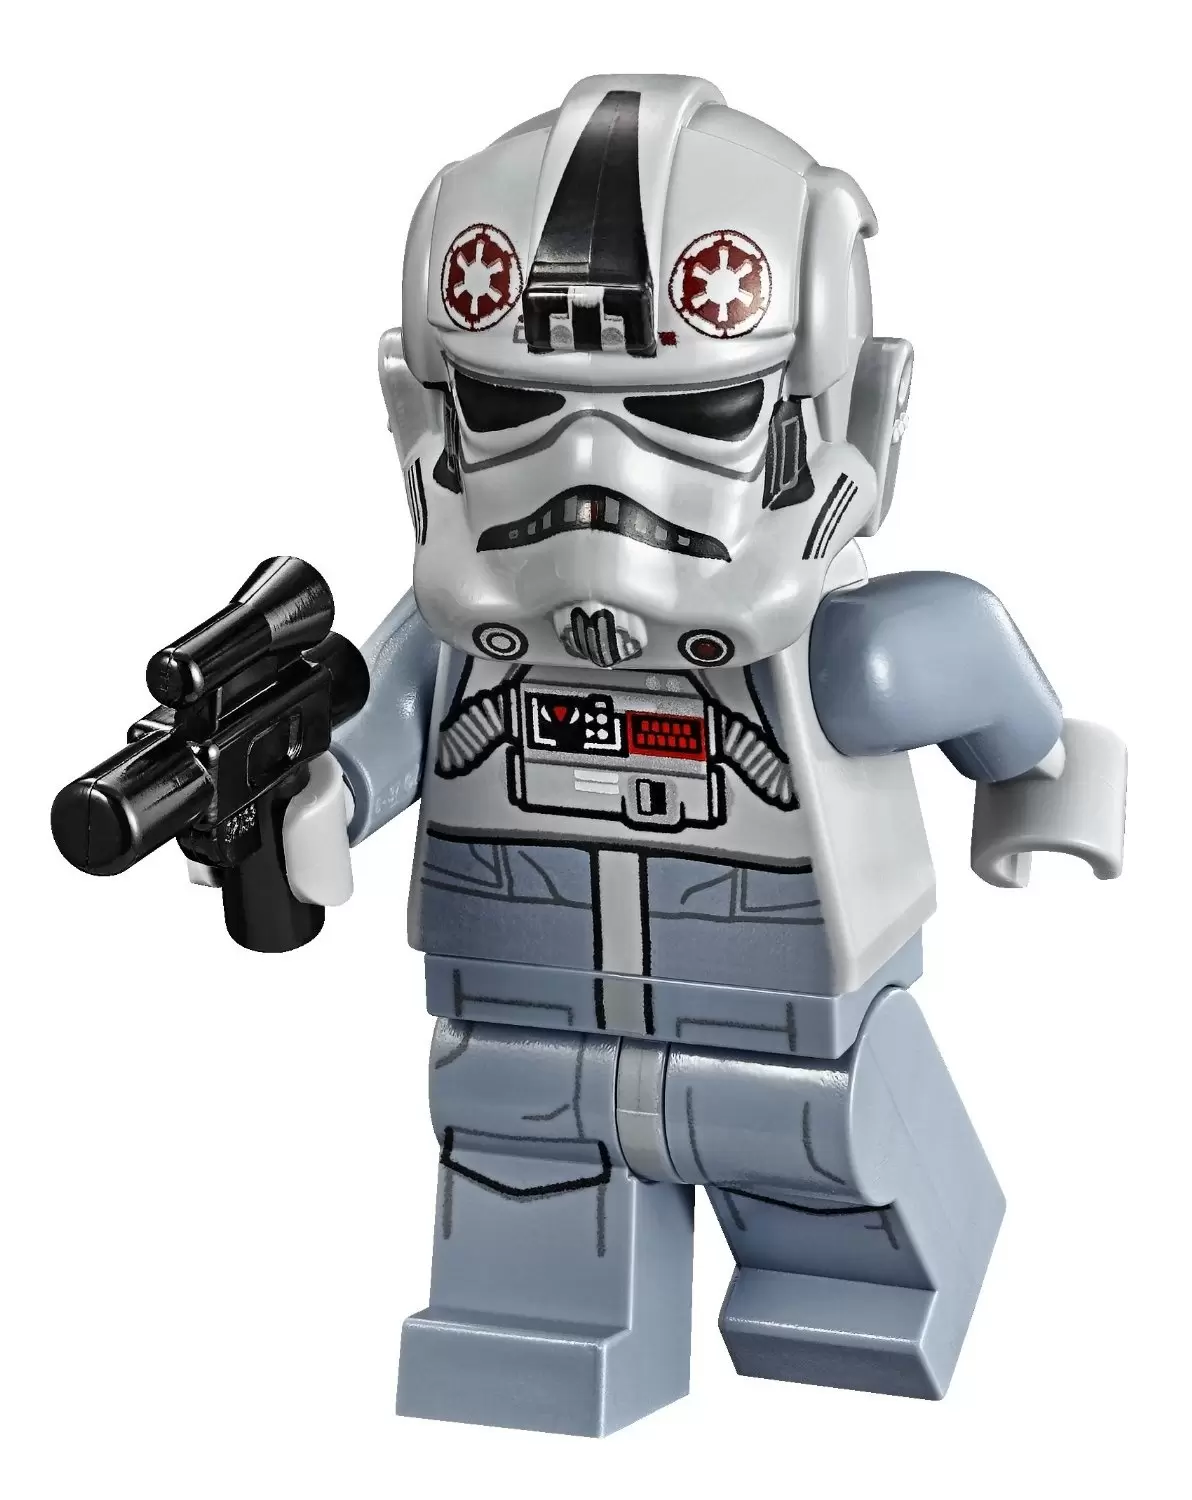 LEGO Star Wars Minifigs - AT-AT Driver - Dark Red Imperial Logo, Grimacing